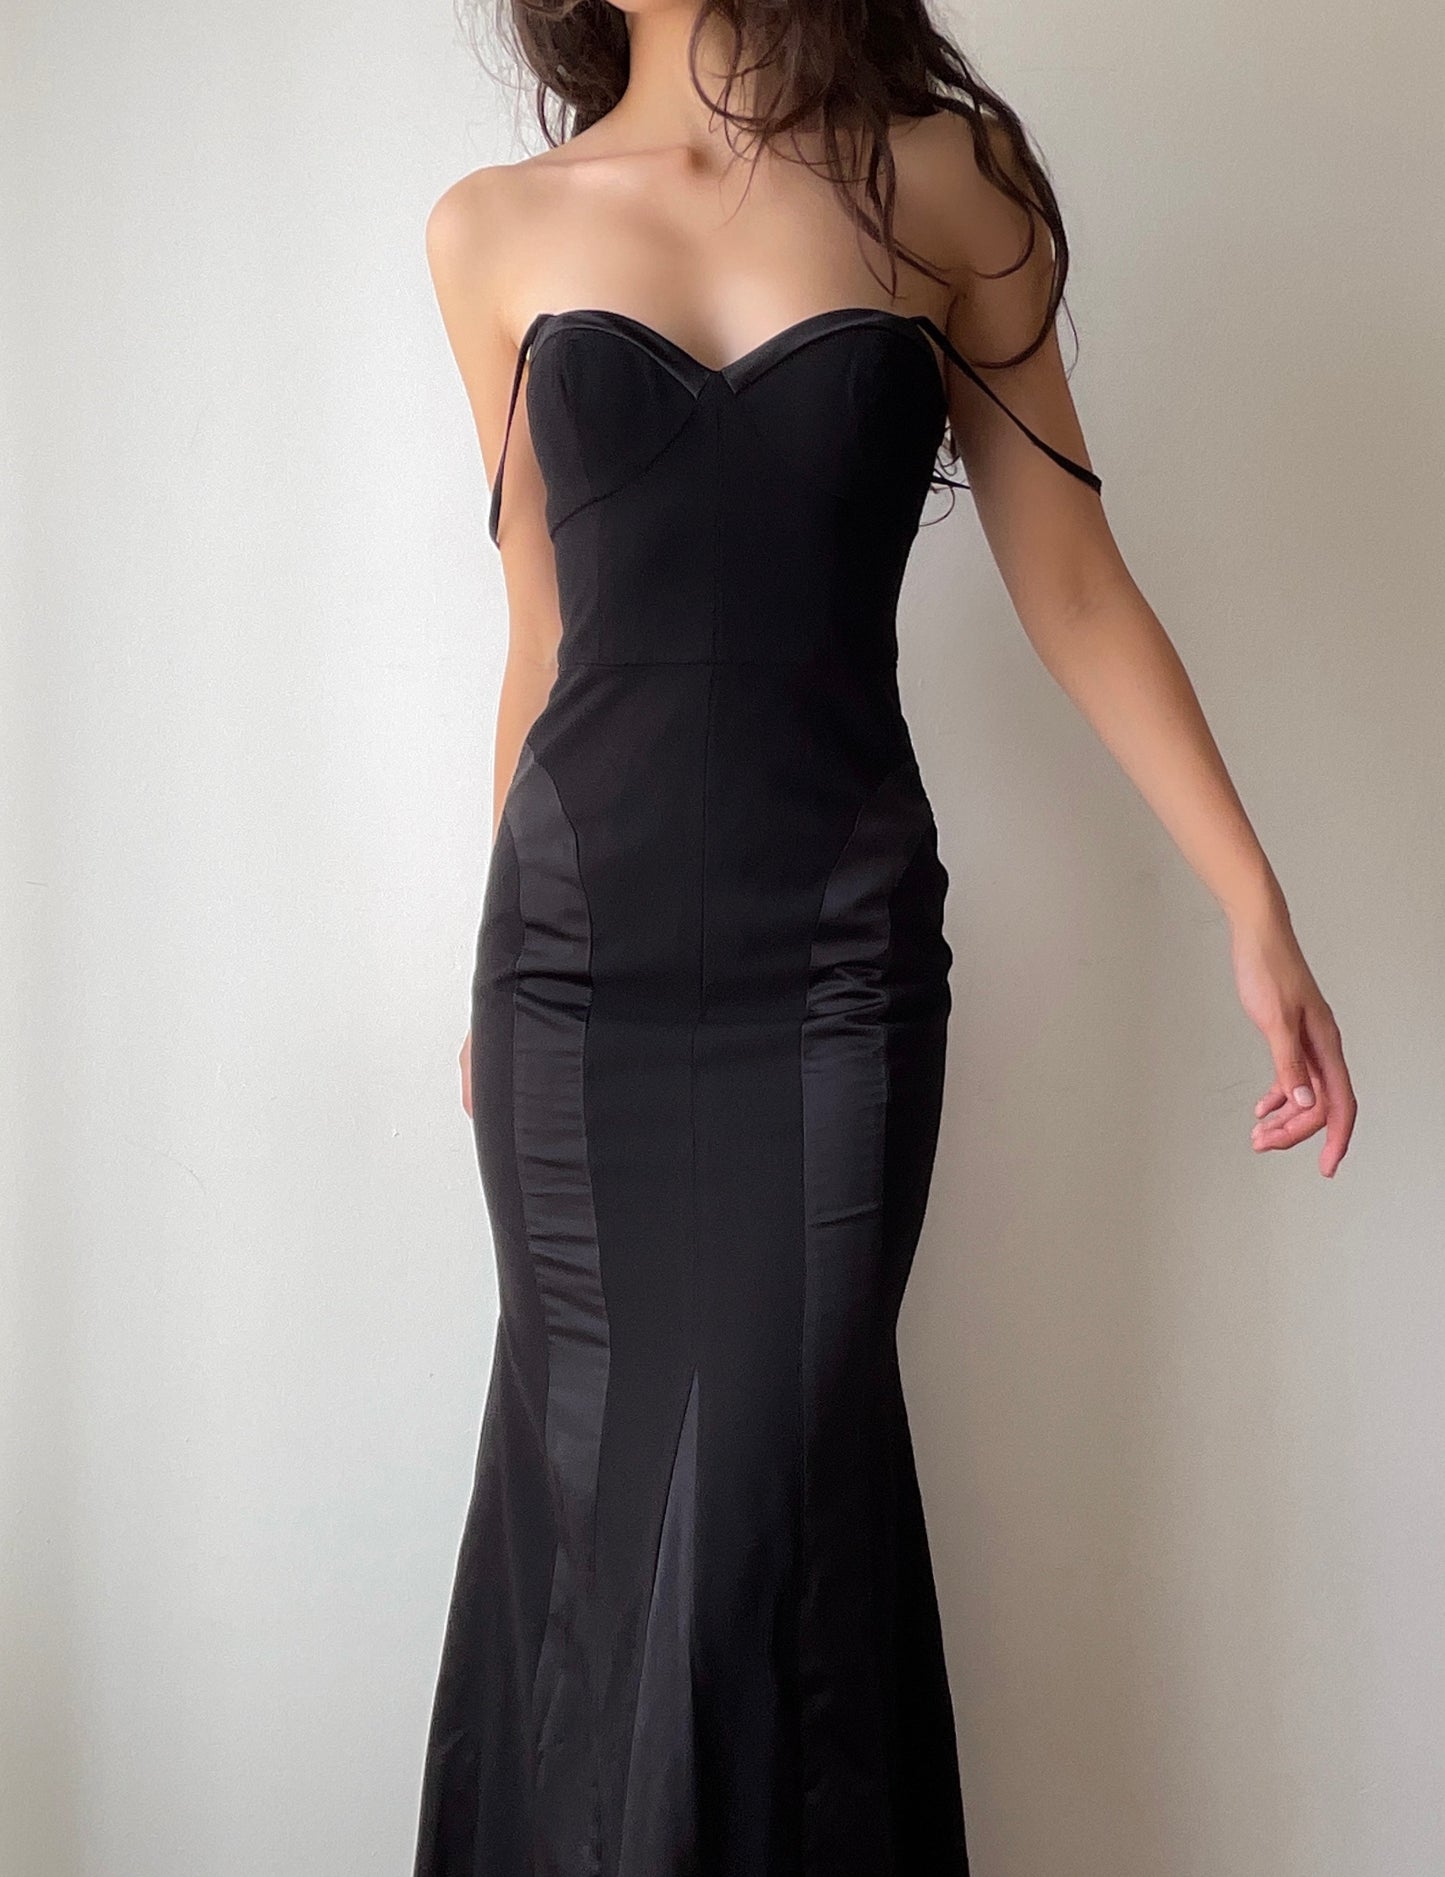 Sweetheart Midnight Gown (XS/S)